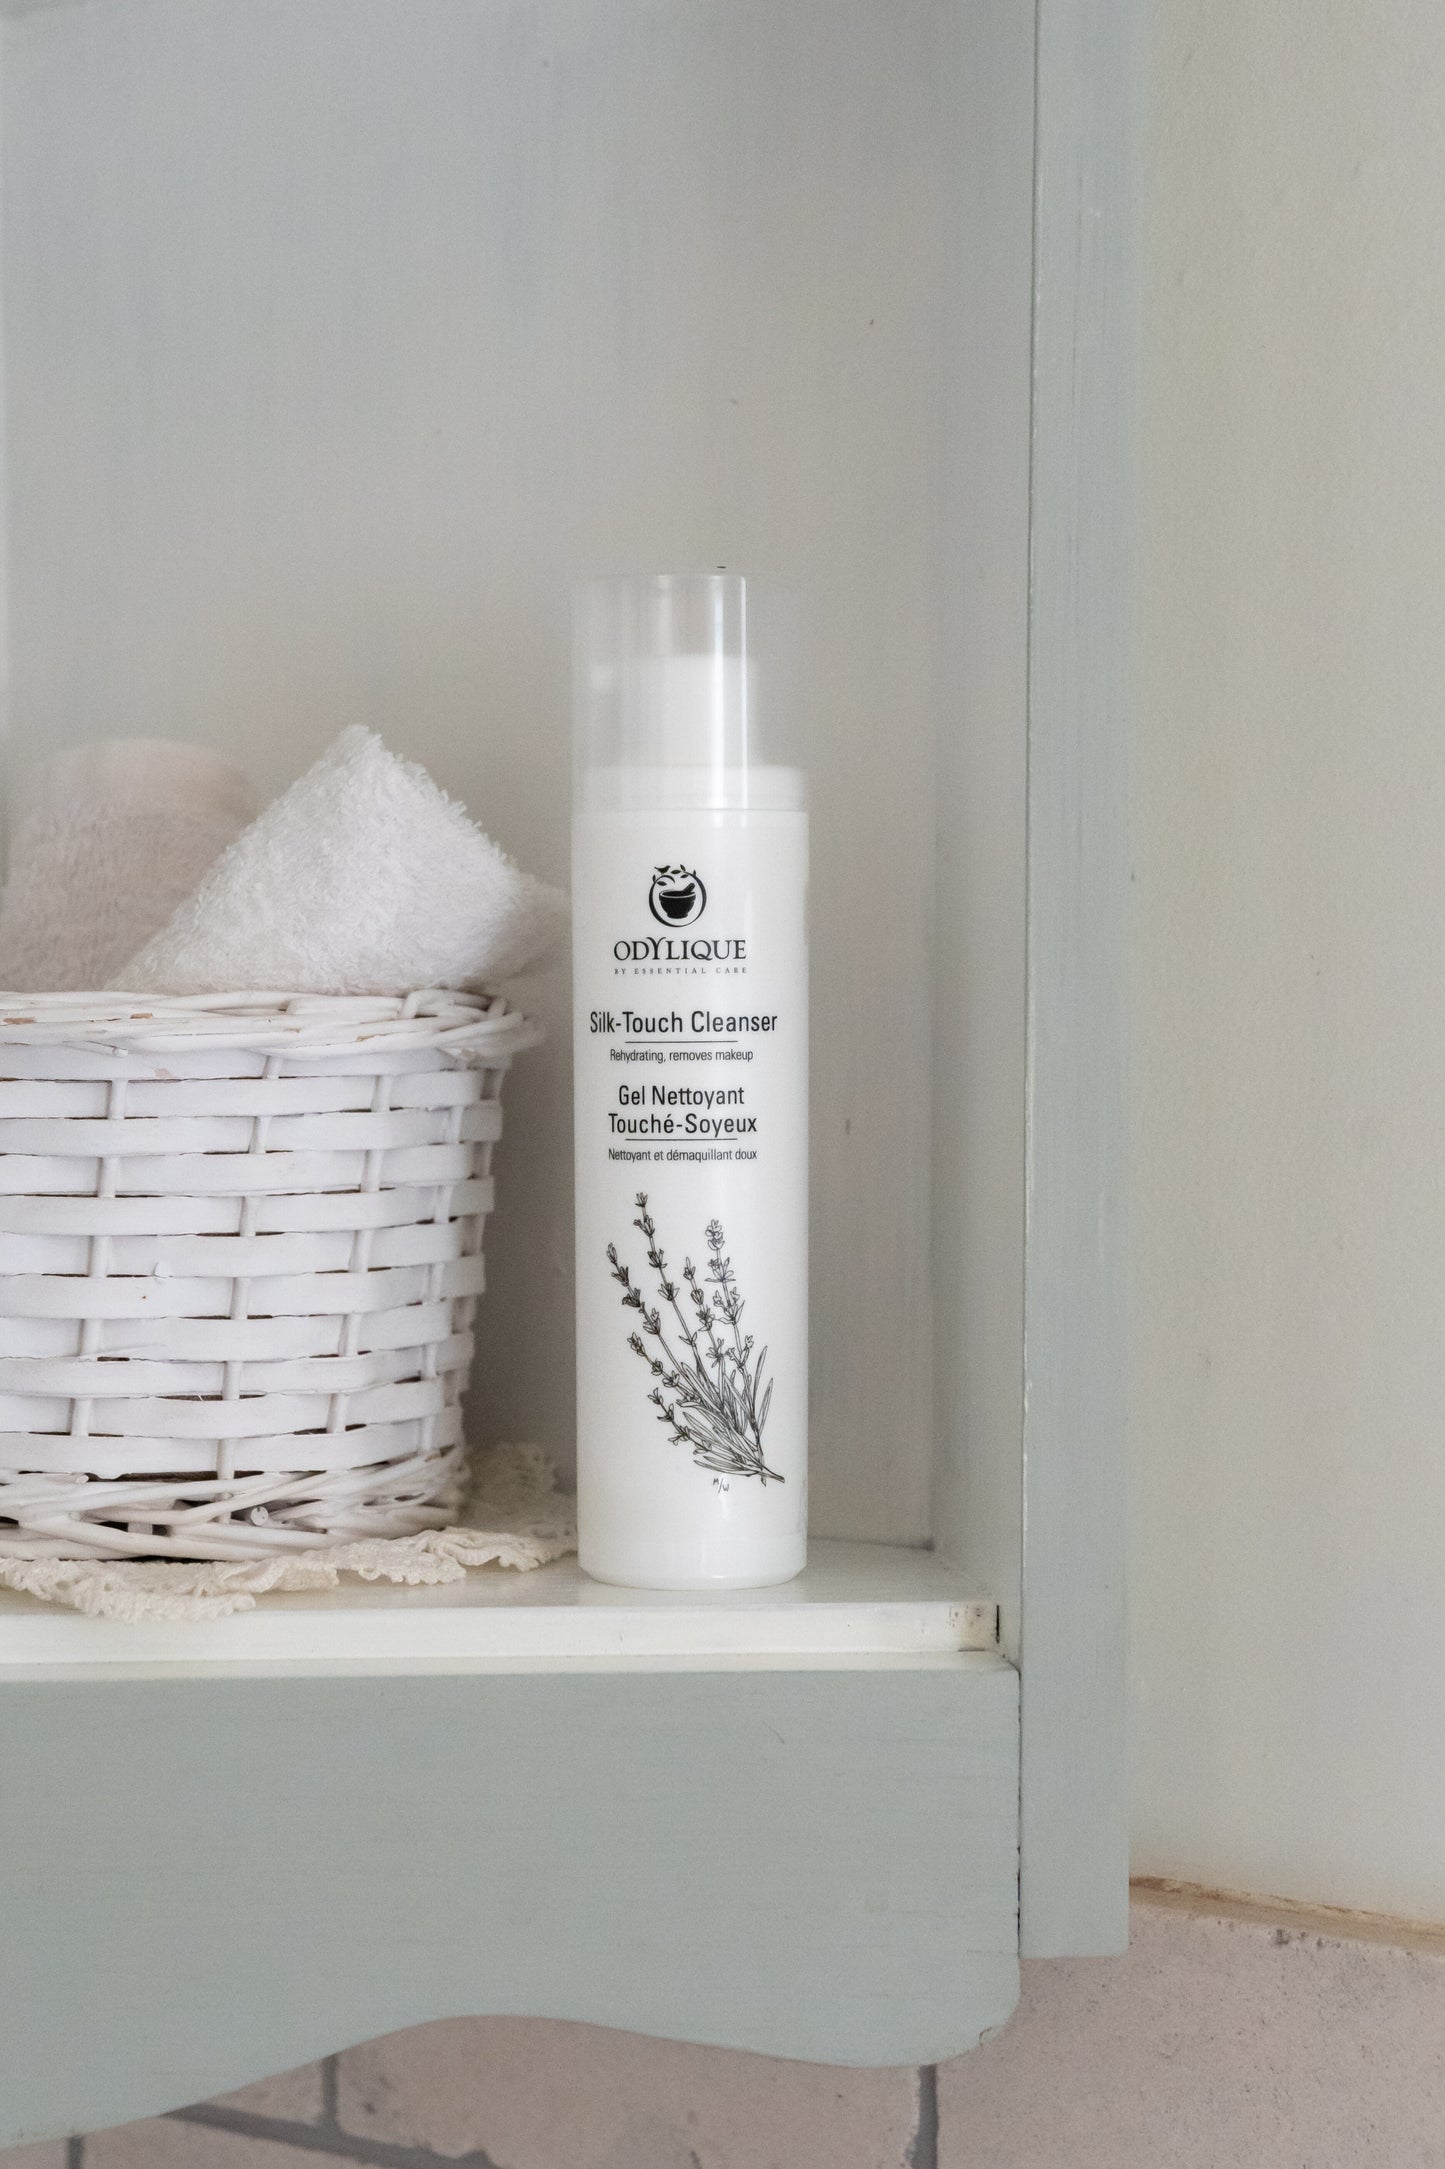 odylique silk touch cleanser for very dry, mature skin sitting on shelf in bathroom next to a white wicker basket with white fluffy face towels peeking out